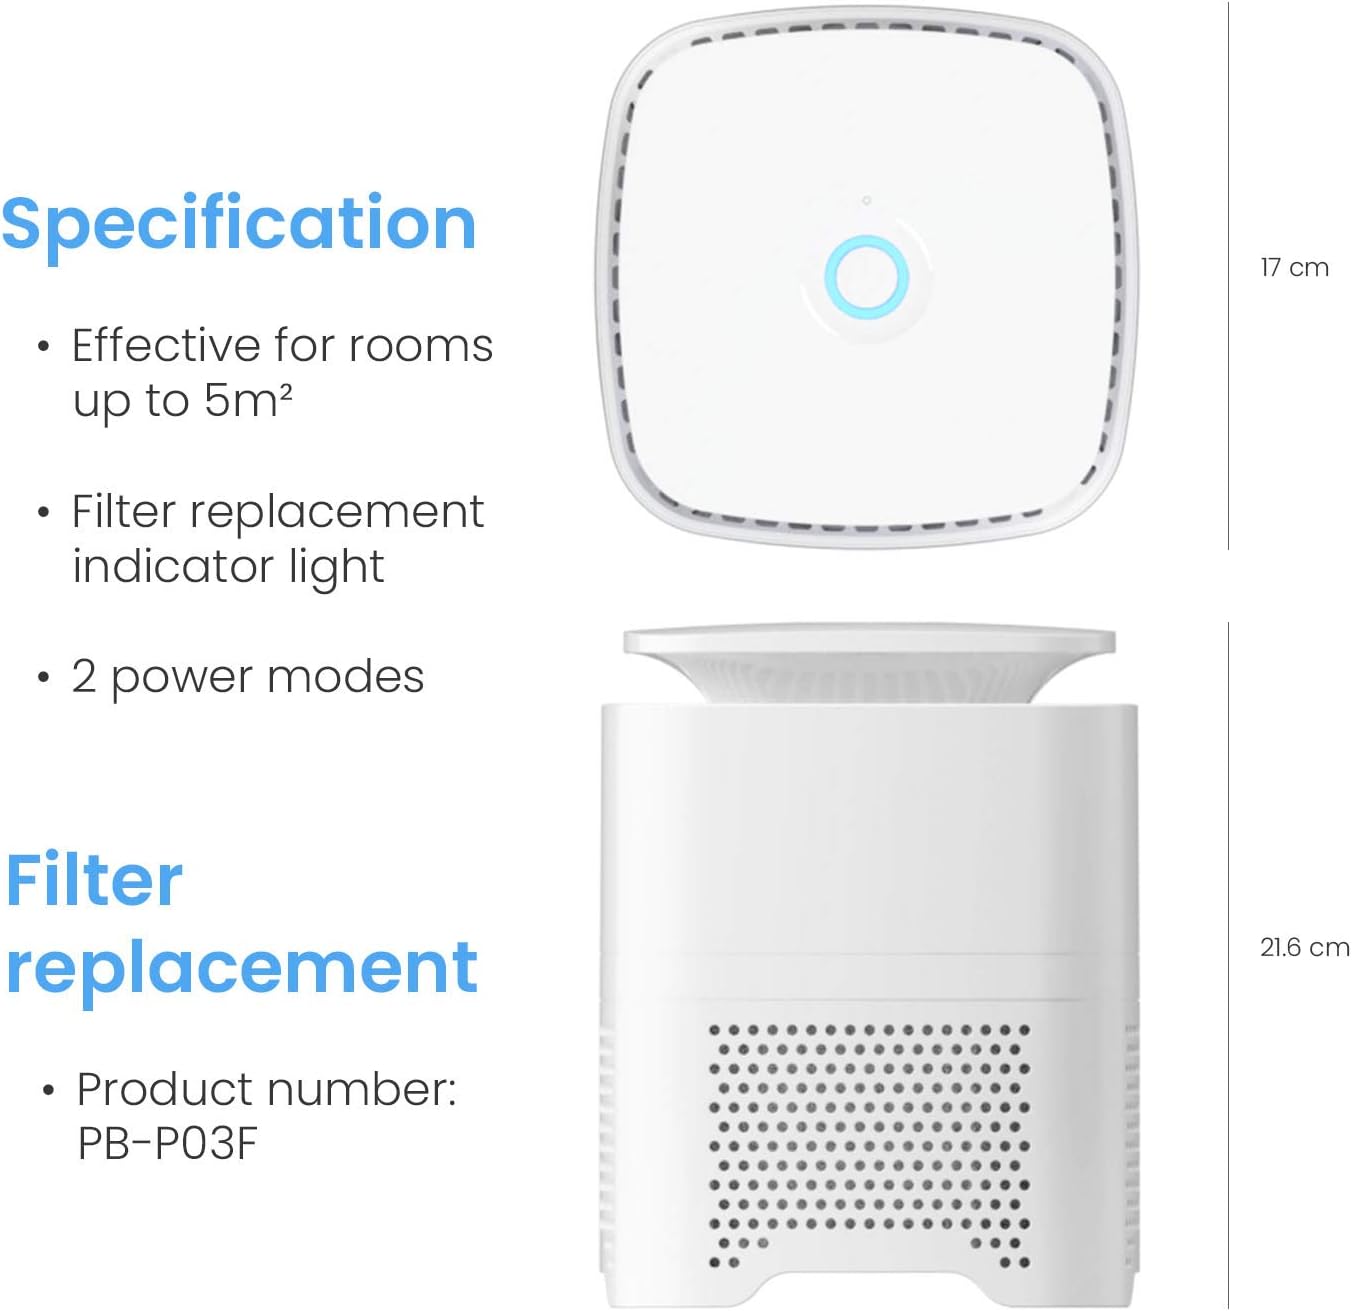 Pro Breeze® Air Purifier for Home, 4 - in - 1 with Pre, True HEPA & Active Carbon Filter with Negative Ion Generator. Air Cleaner for Home, Office, Allergies, Smoke, Dust, Pollen & Pet Hair - Amazing Gadgets Outlet